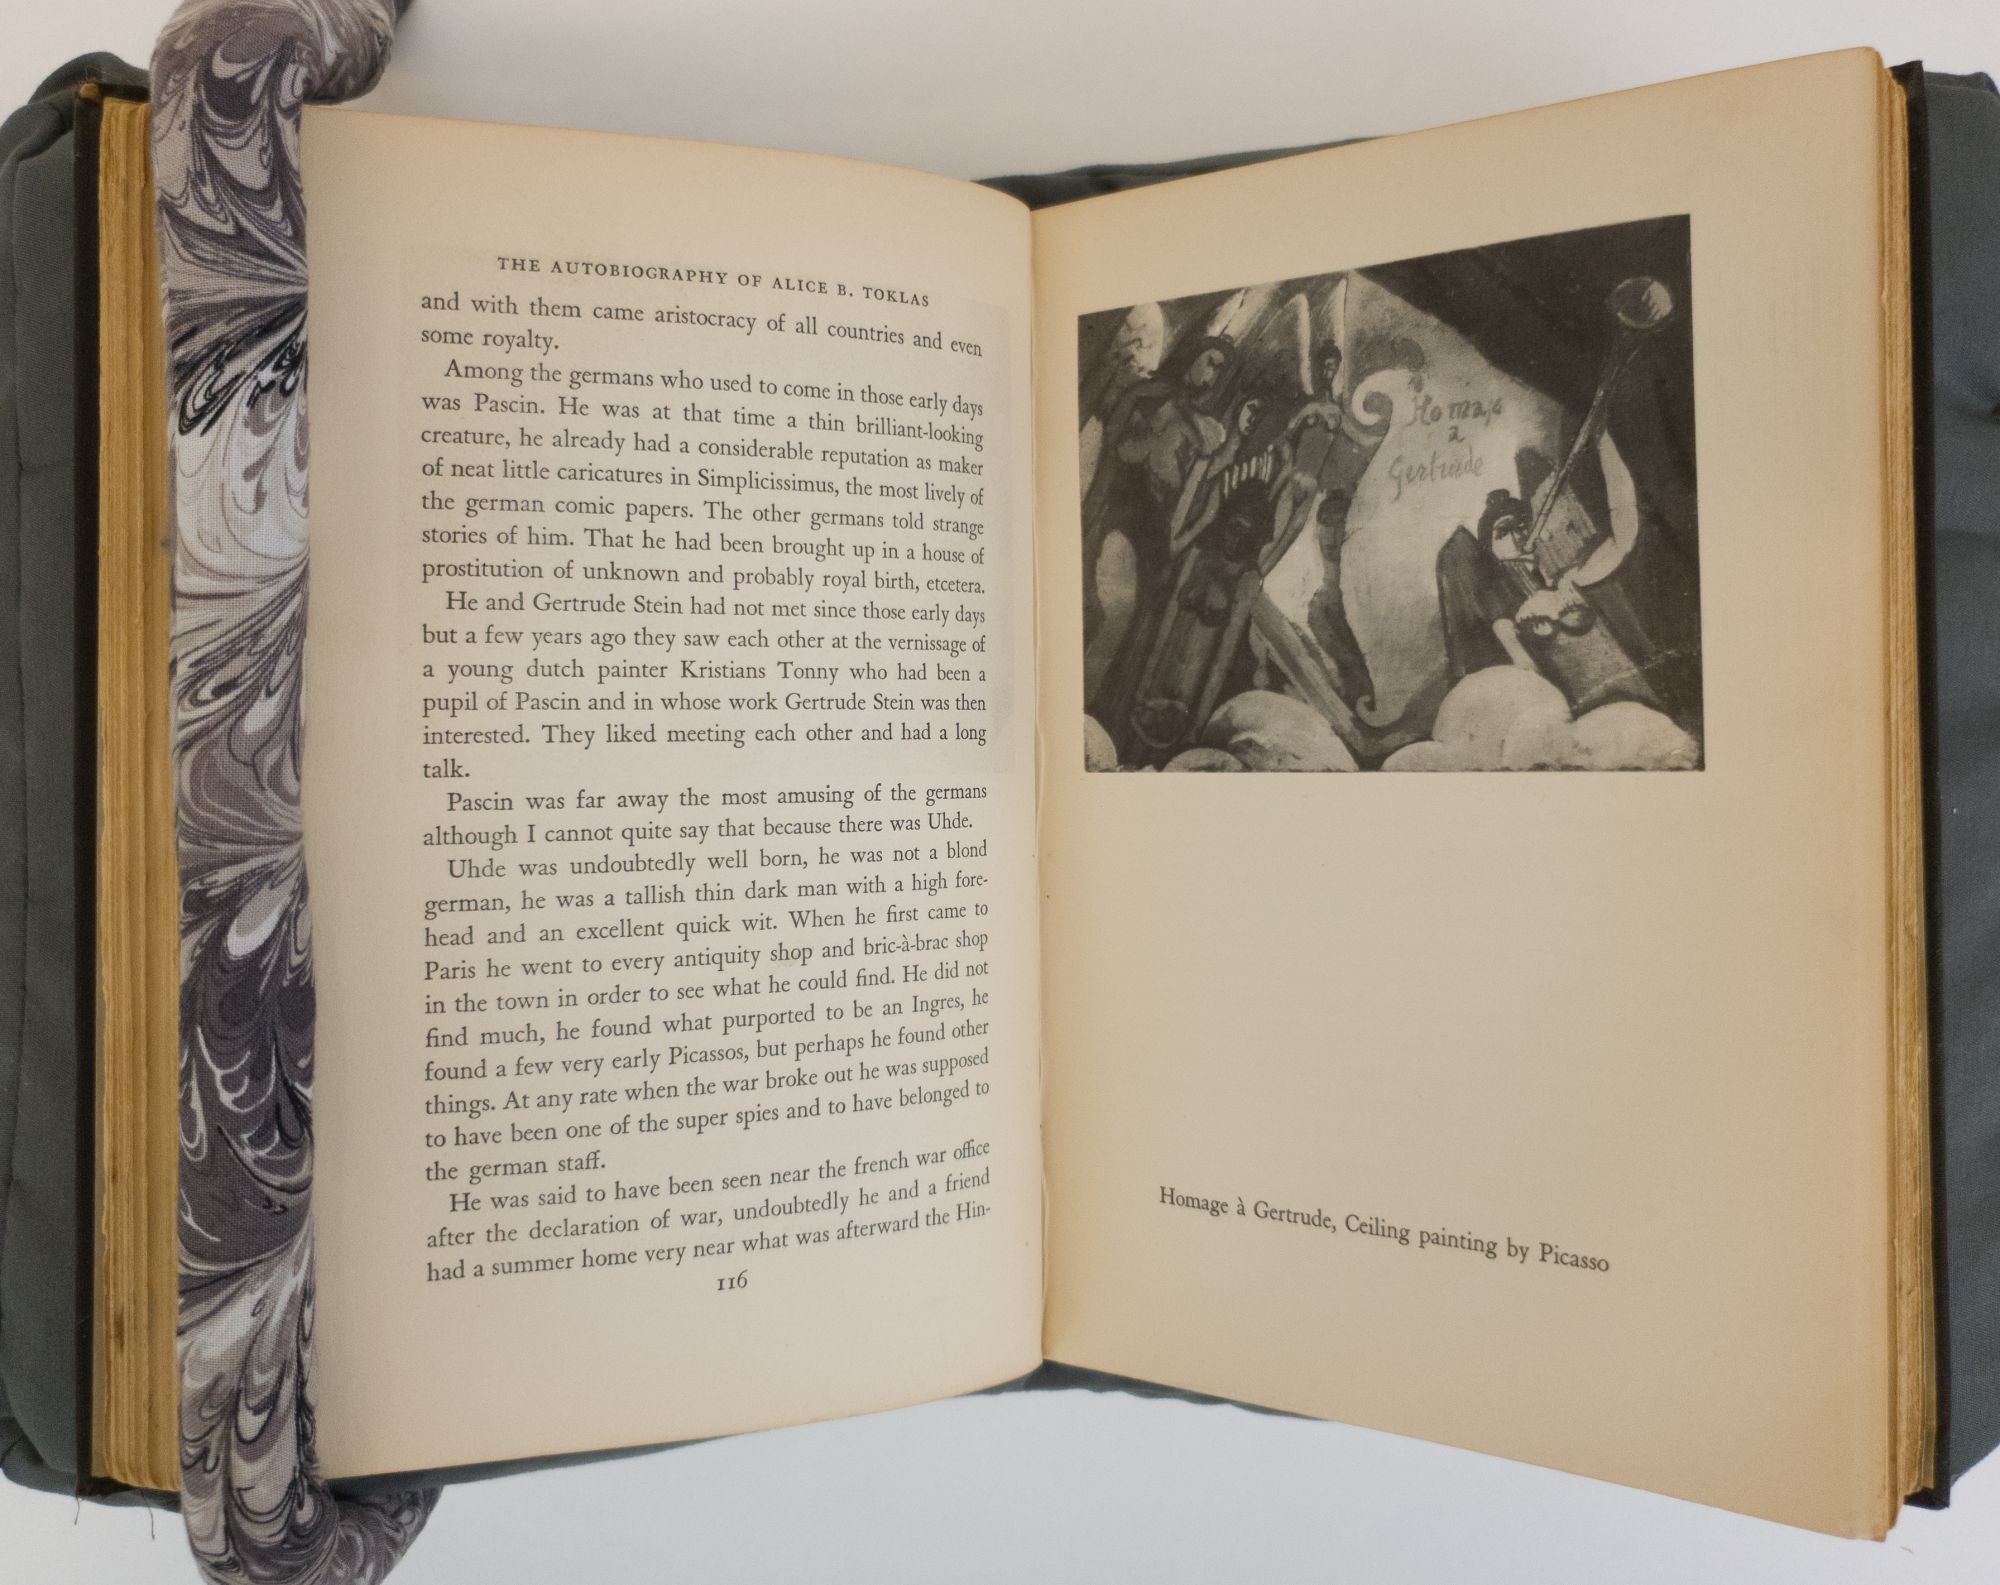 Product Image for THE AUTOBIOGRAPHY OF ALICE B. TOKLAS [Signed by Stein and Toklas]